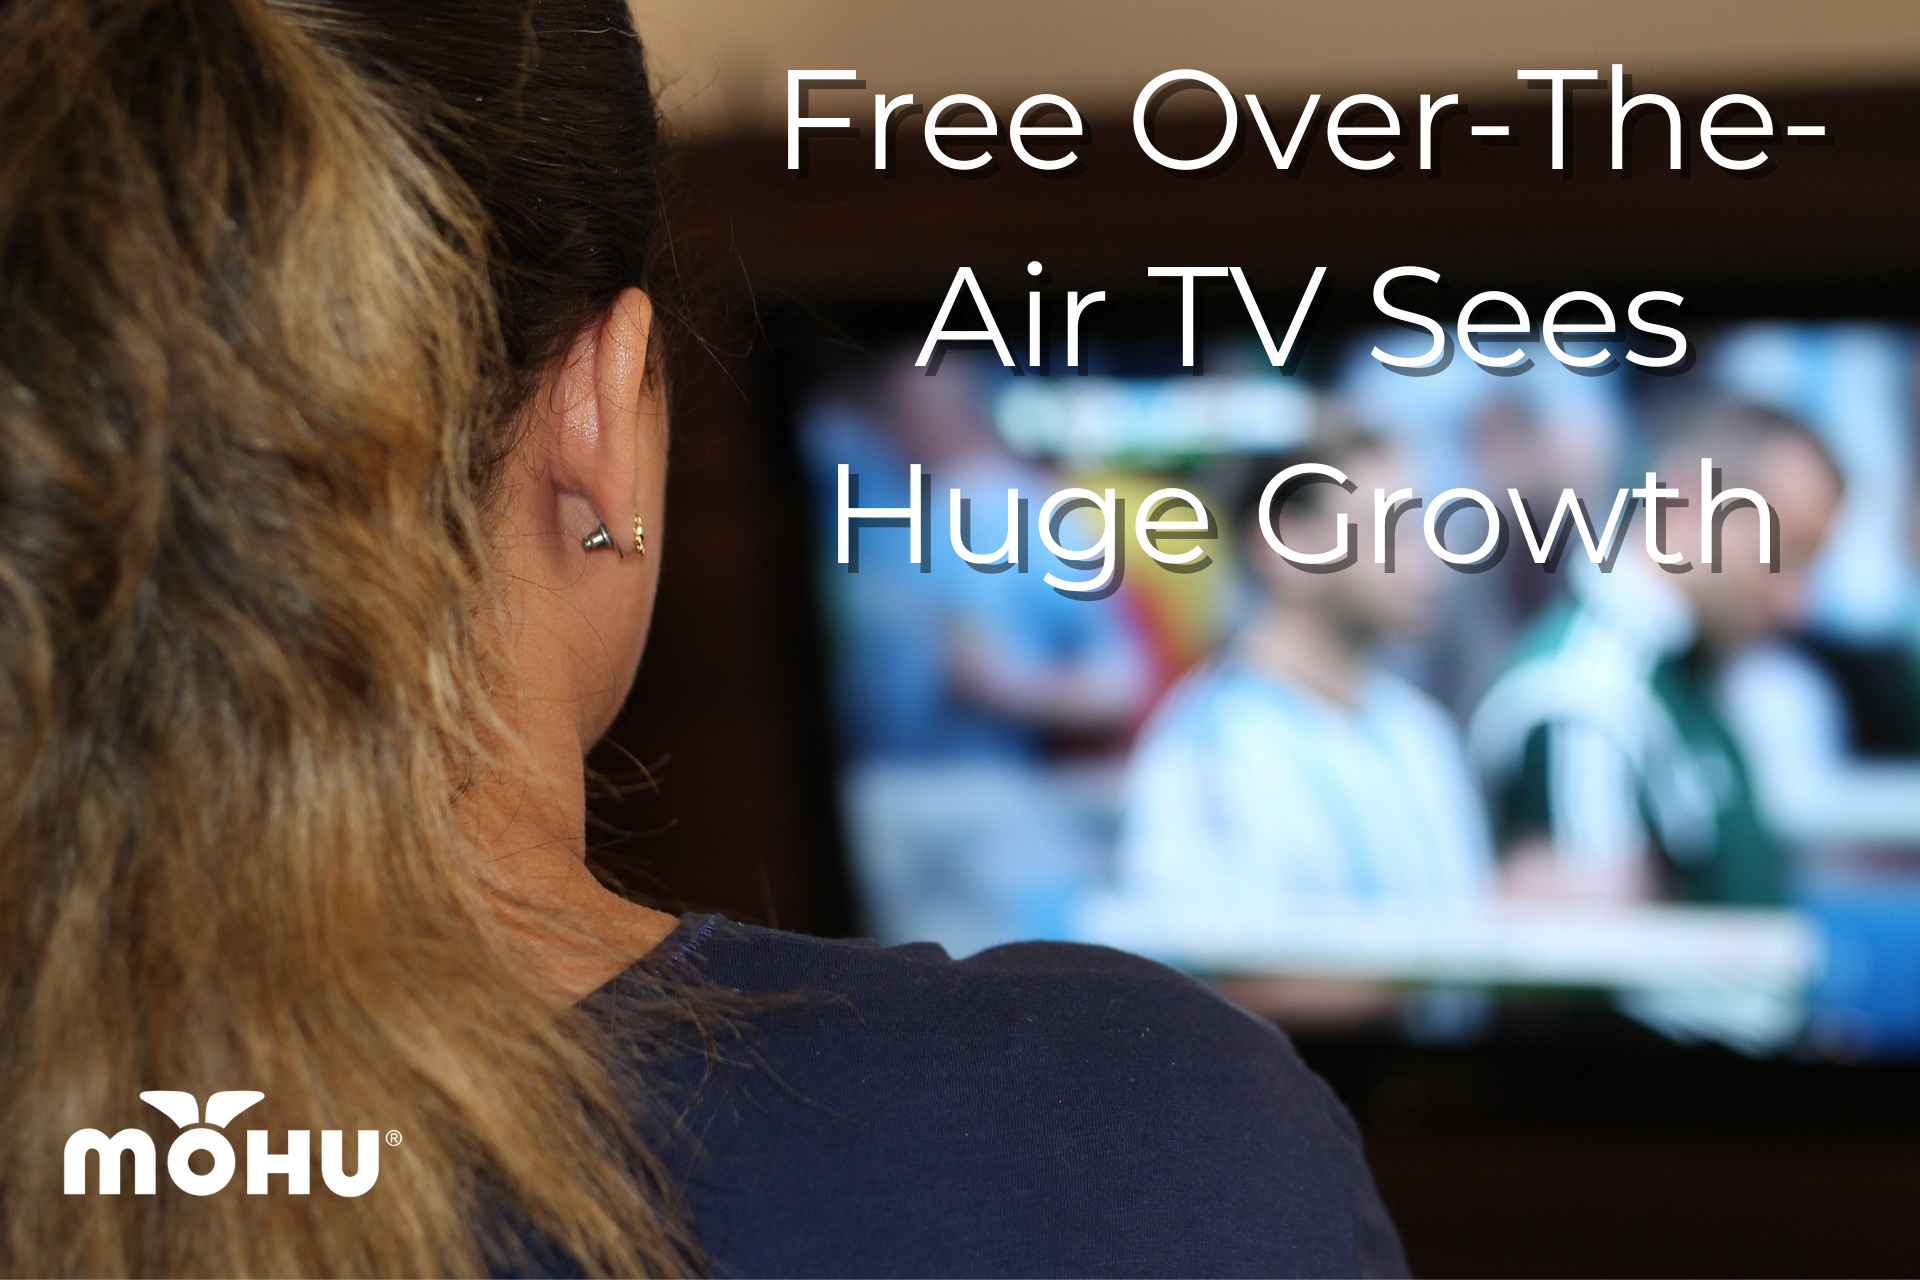 Woman sitting in front of Television, Free Over-The-Air TV Sees Huge Growth